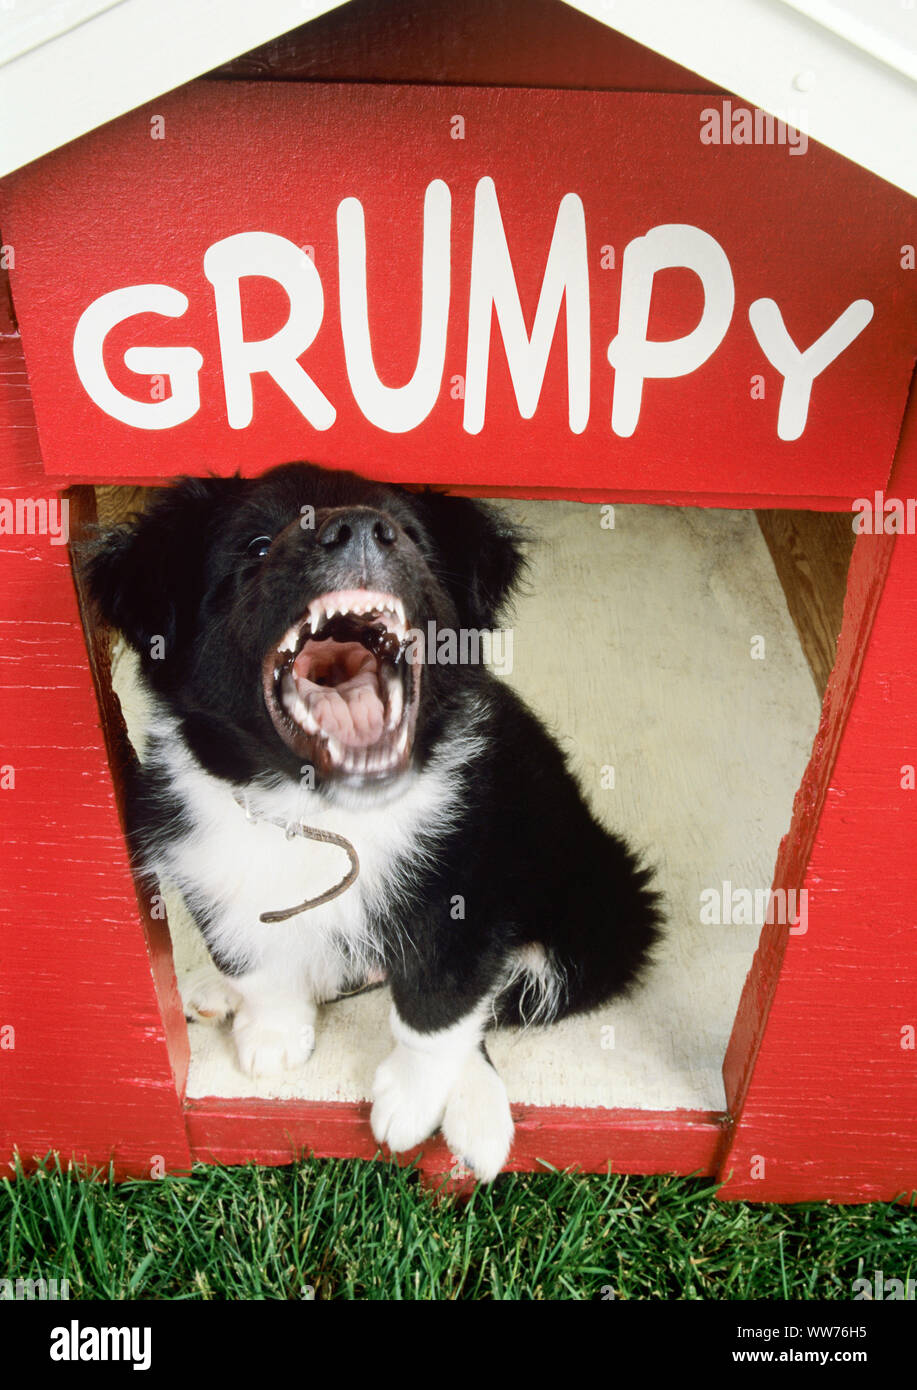 Angry Dog named 'Grumpy' in a Red Doghouse Stock Photo